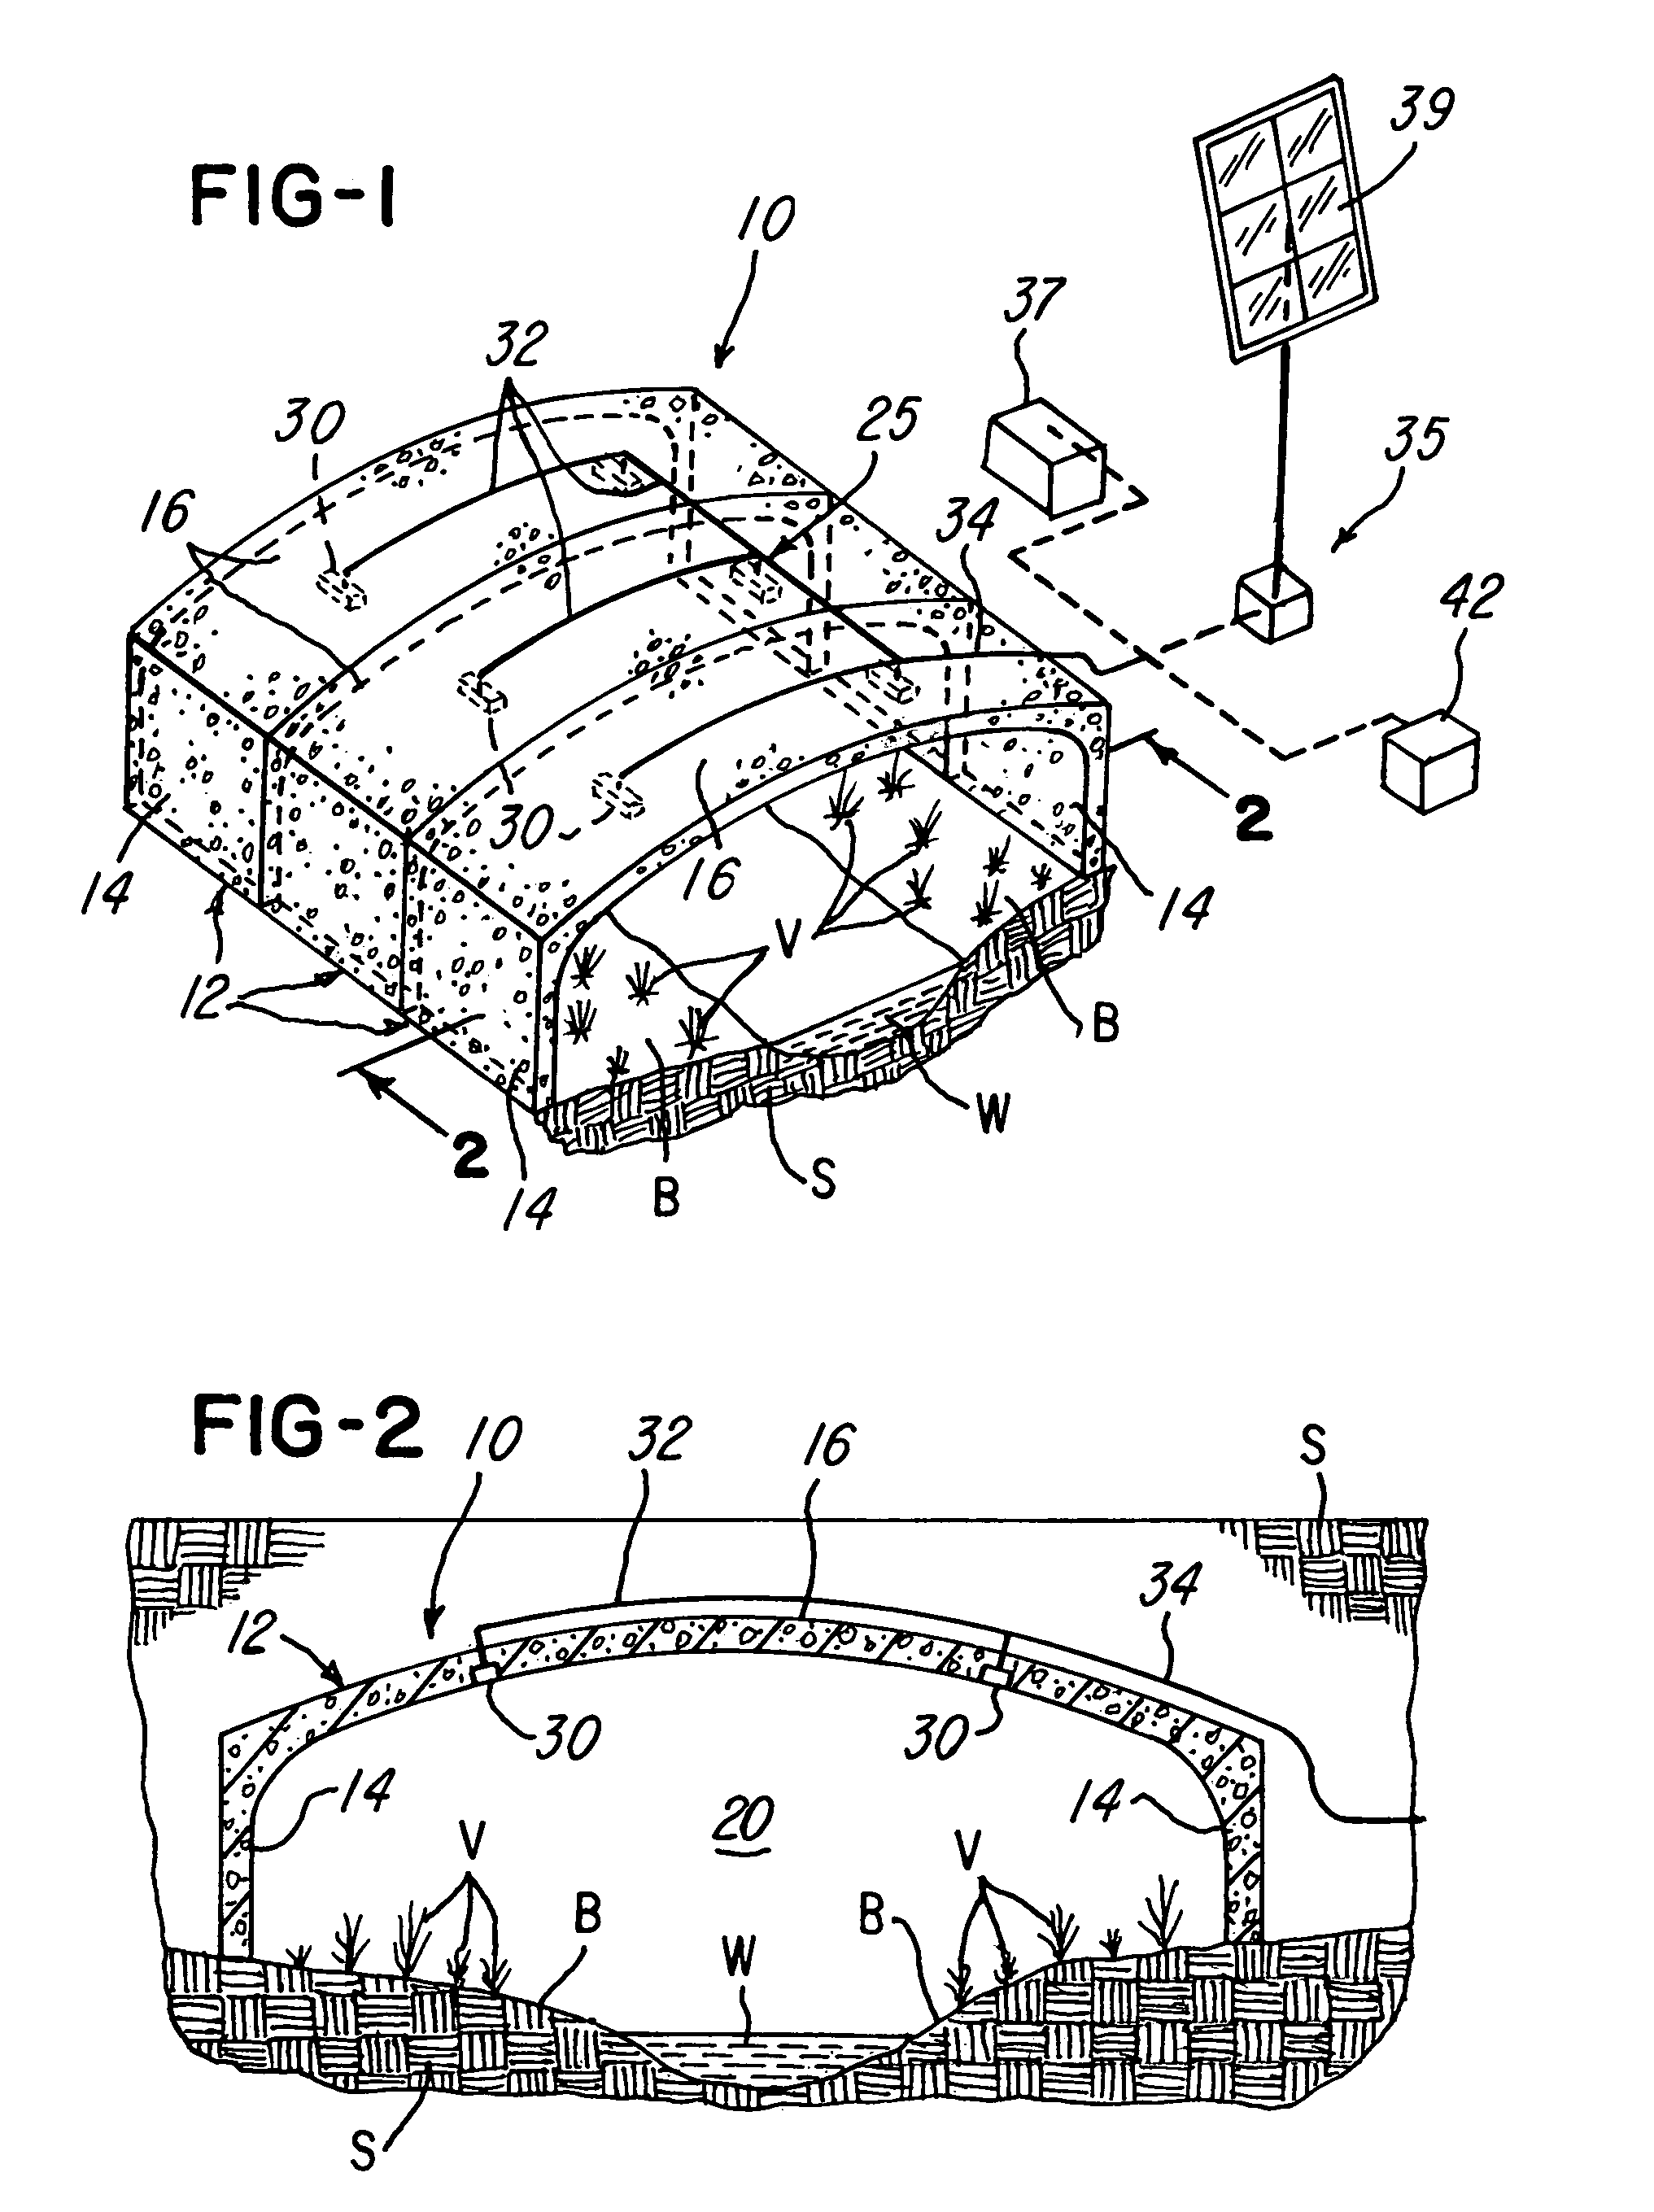 Method for improving the environment within soil embedded culvert and bridge systems